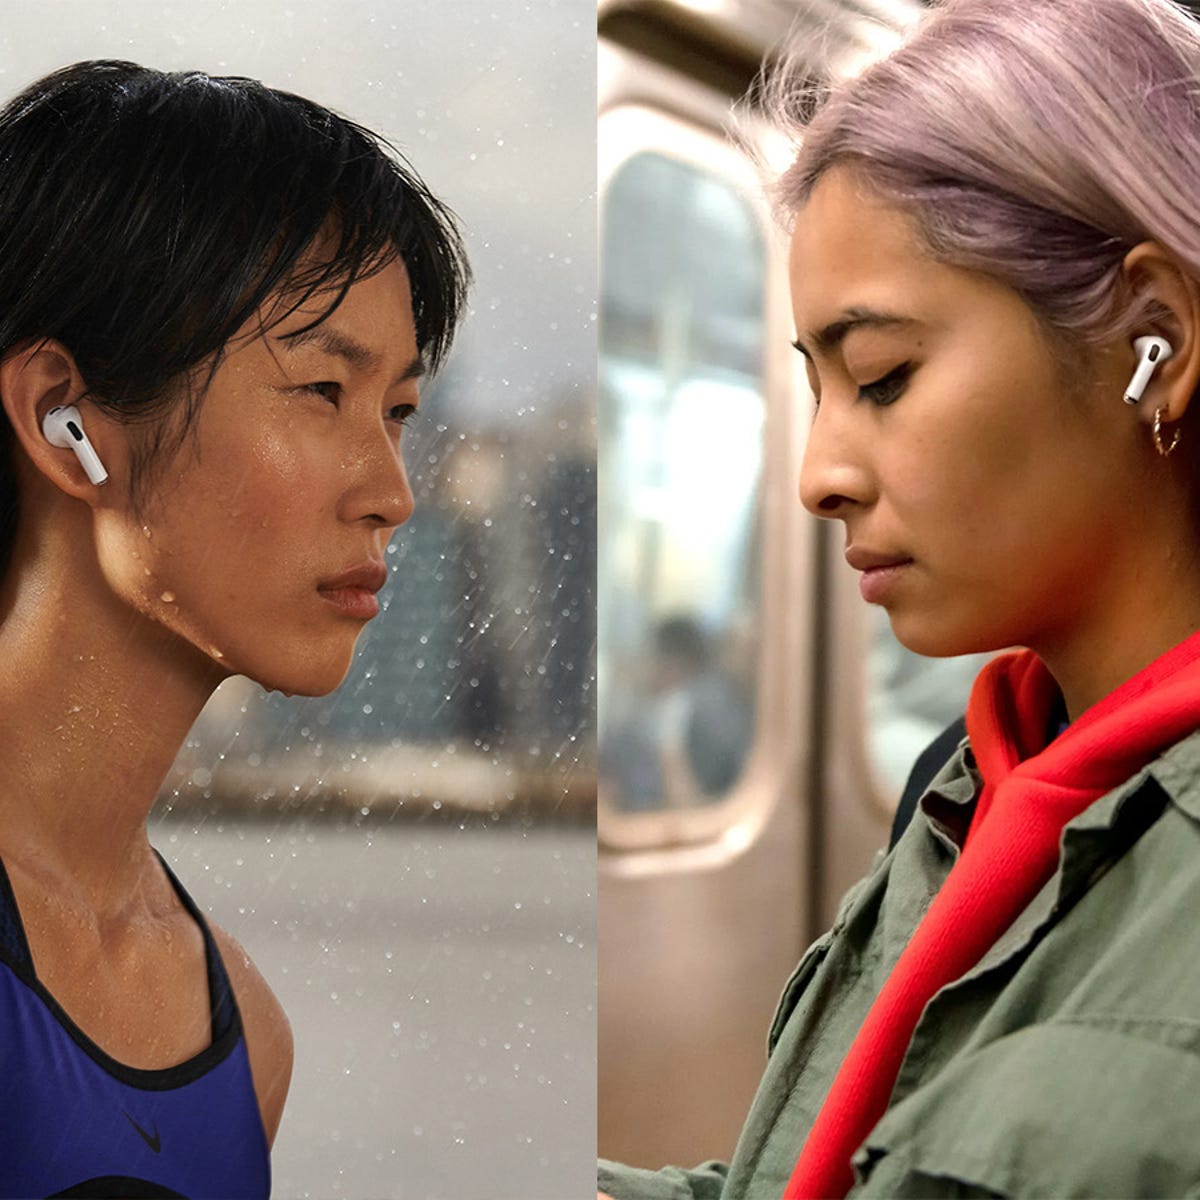 Apple AirPods 3 vs AirPods Pro (1st Gen): Which earbuds should you still  buy?